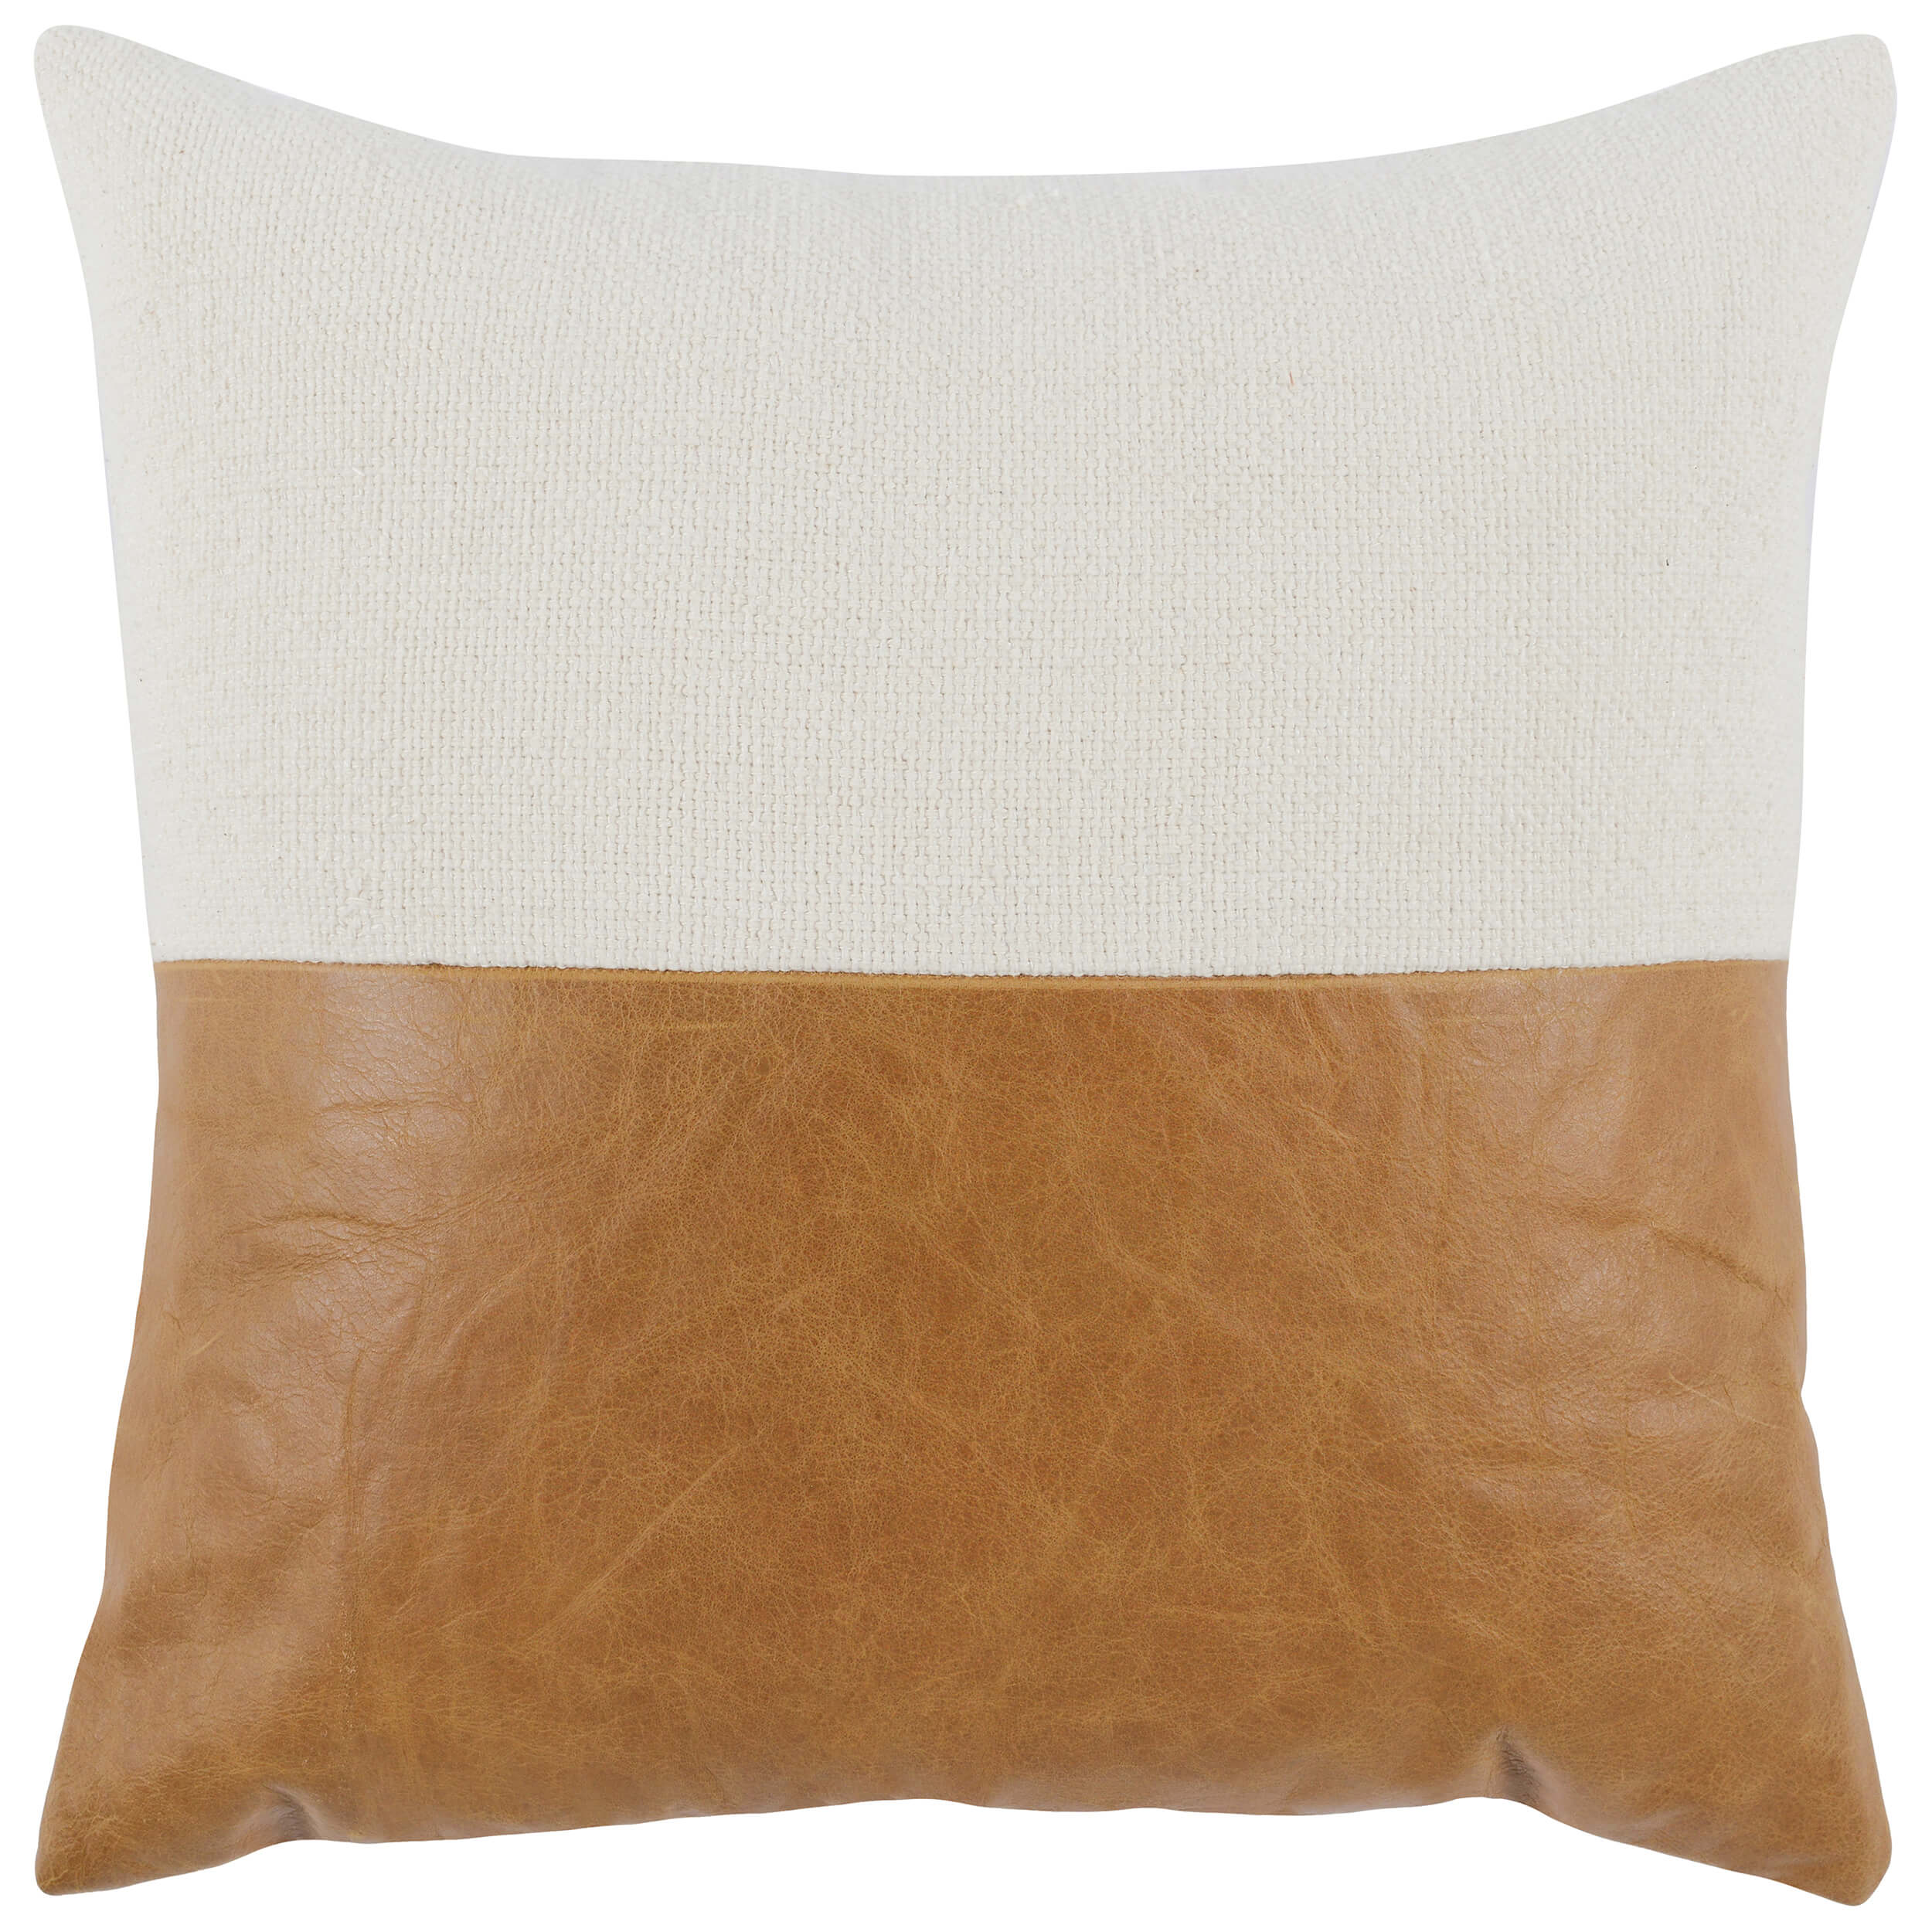 Image of Canyon Pillow, Ivory/Chestnut